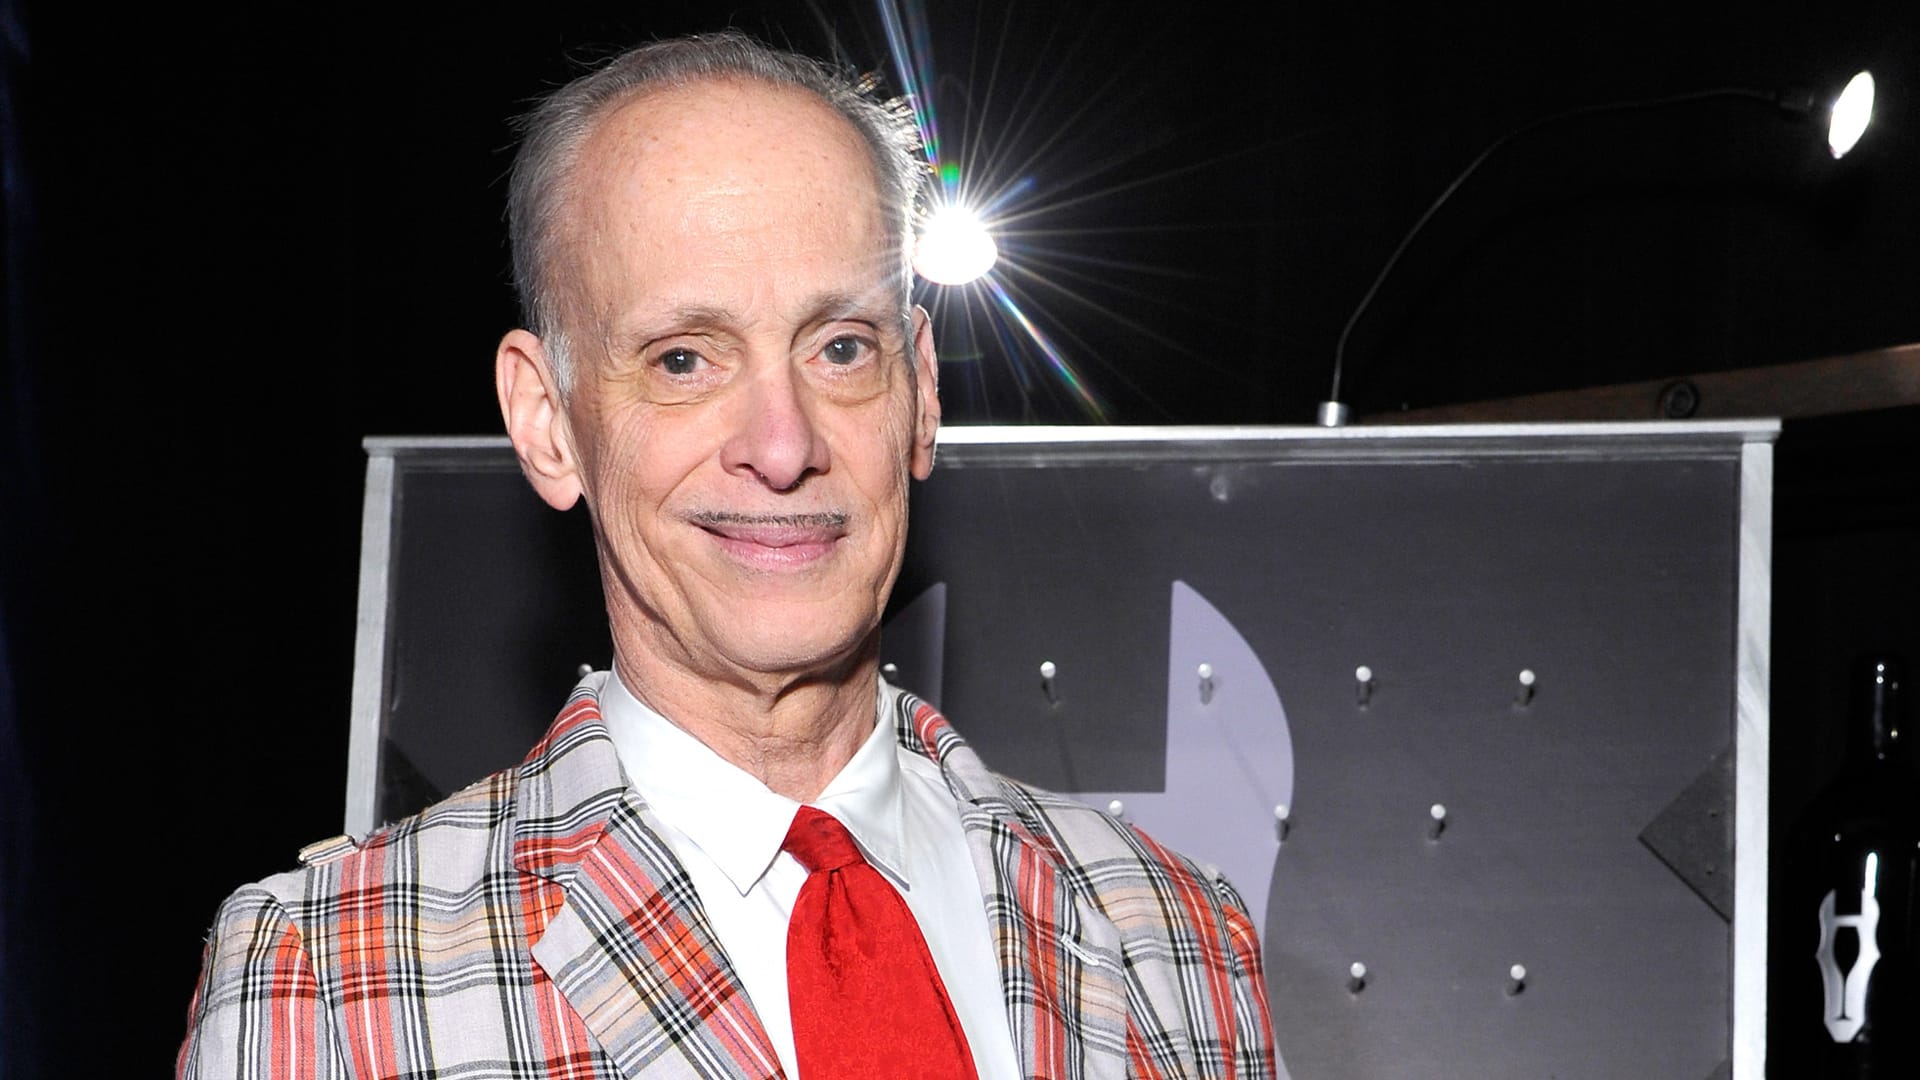 John Waters Doesn’t Need To Make Movies To Make Trouble